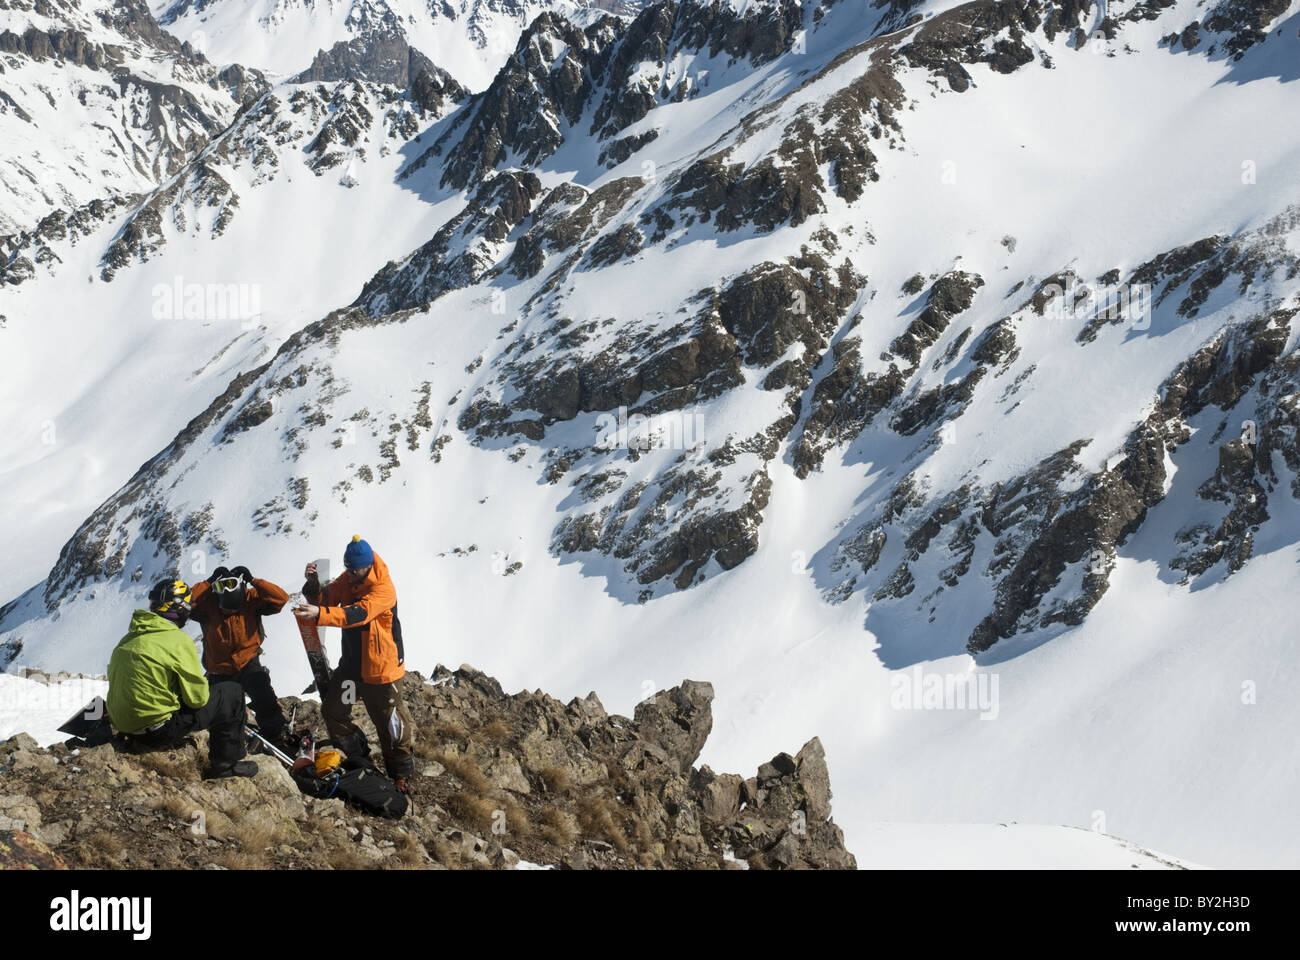 A group of free skiers getting ready for the way down in La Grave, France. Stock Photo